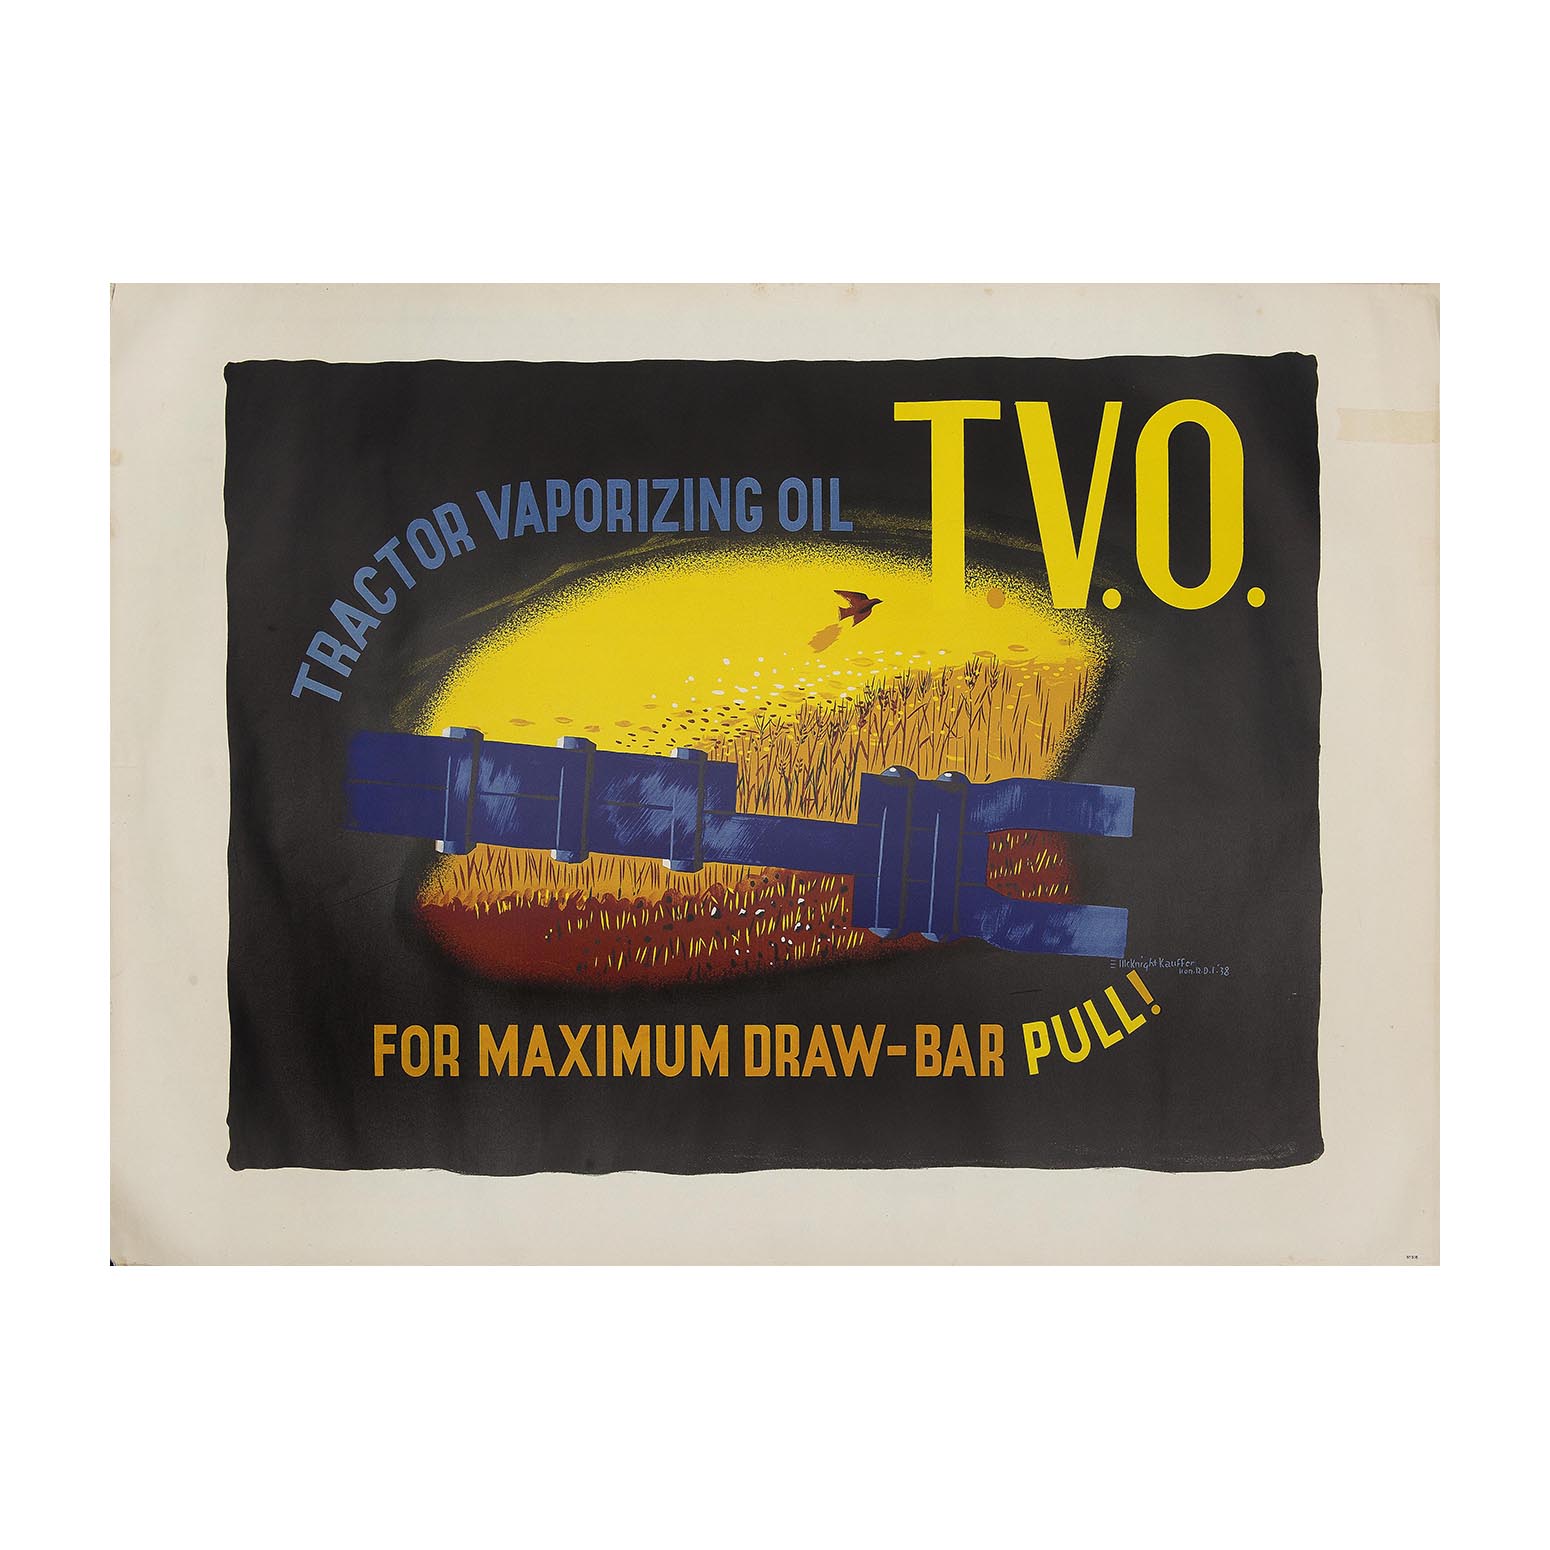 Original poster: TVO. Tractor Vaporizing Oil for Maximum Draw-bar Pull!, designed by Edward McKnight Kauffer, 1938. The design features a tractor draw-bar, used to attach trailers to the tractor unit, against a modernist-inspired agricultural landscape.